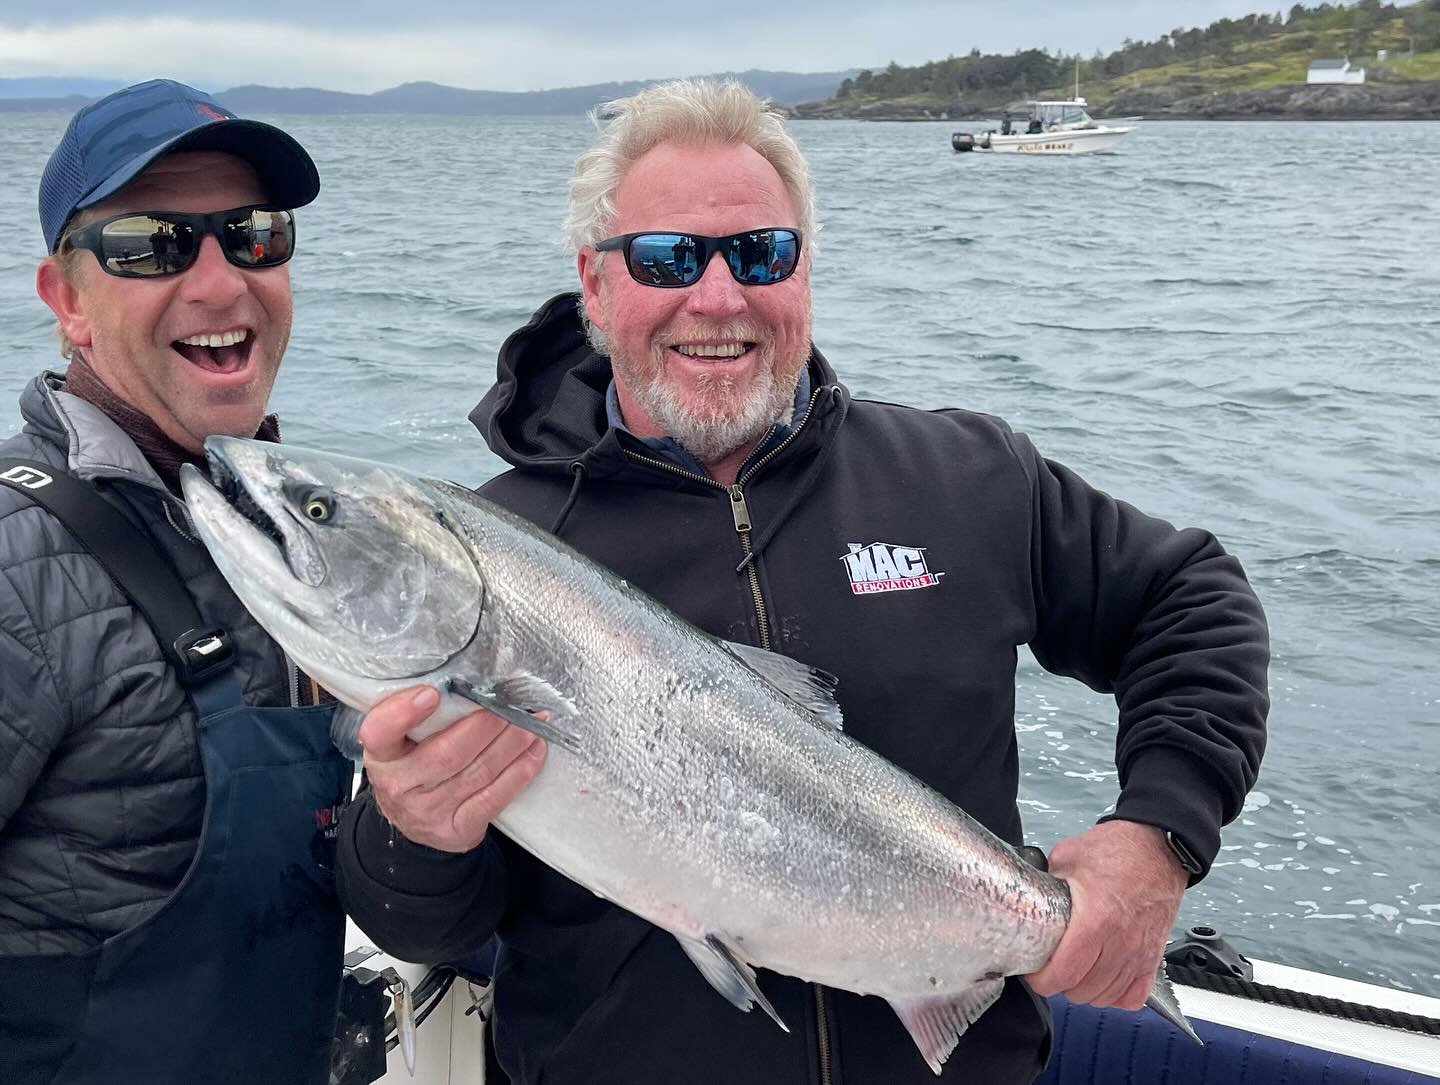 Great morning on the water with this crew, fought the weasterly and got a couple big wilds to let go and spawn! Also a nice hatchery for the dinner table to go with the crab! #chinooksalmon #westcoast #yyj #tourismvictoria #catchandrelease #islanderr